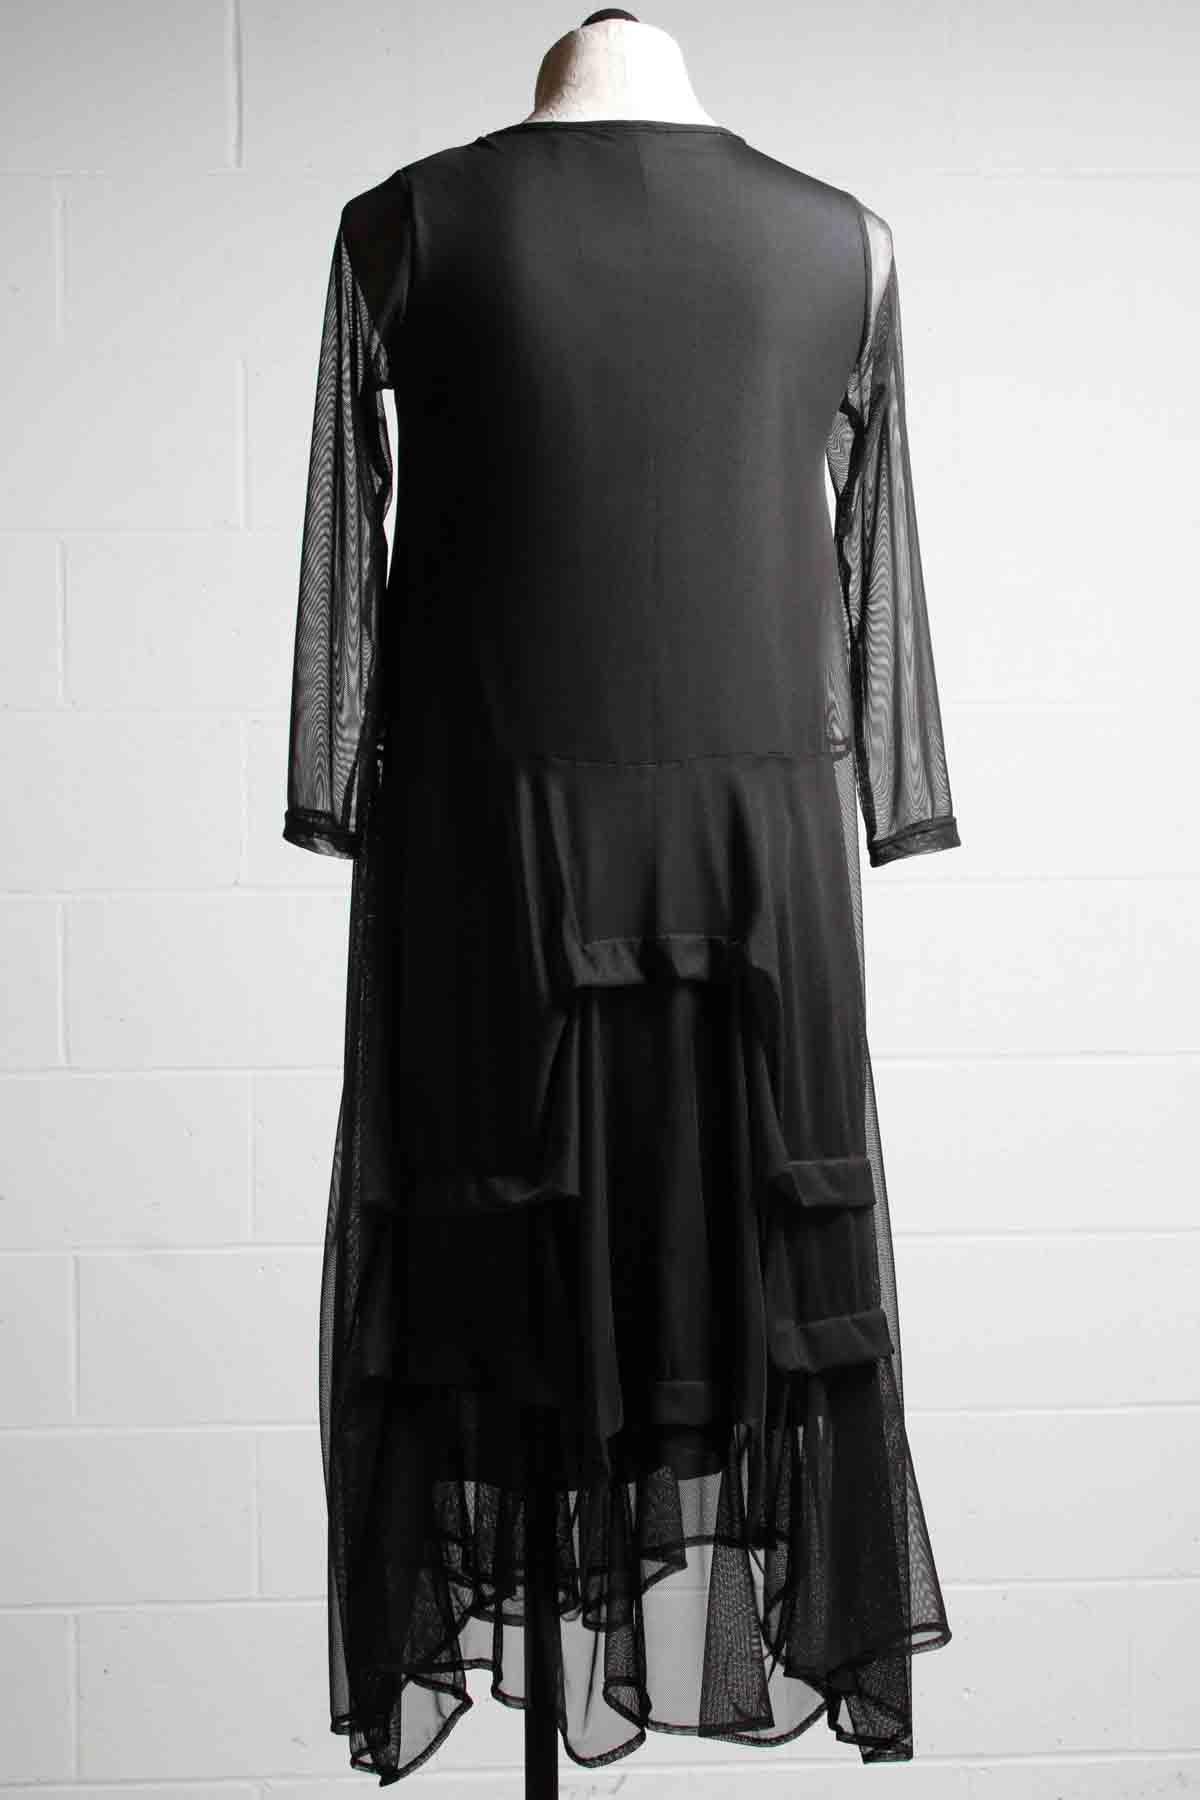 back view of black Lined Mesh Dress by Reina Lee with Ruched Skirt and Sheer 3/4 Sleeves